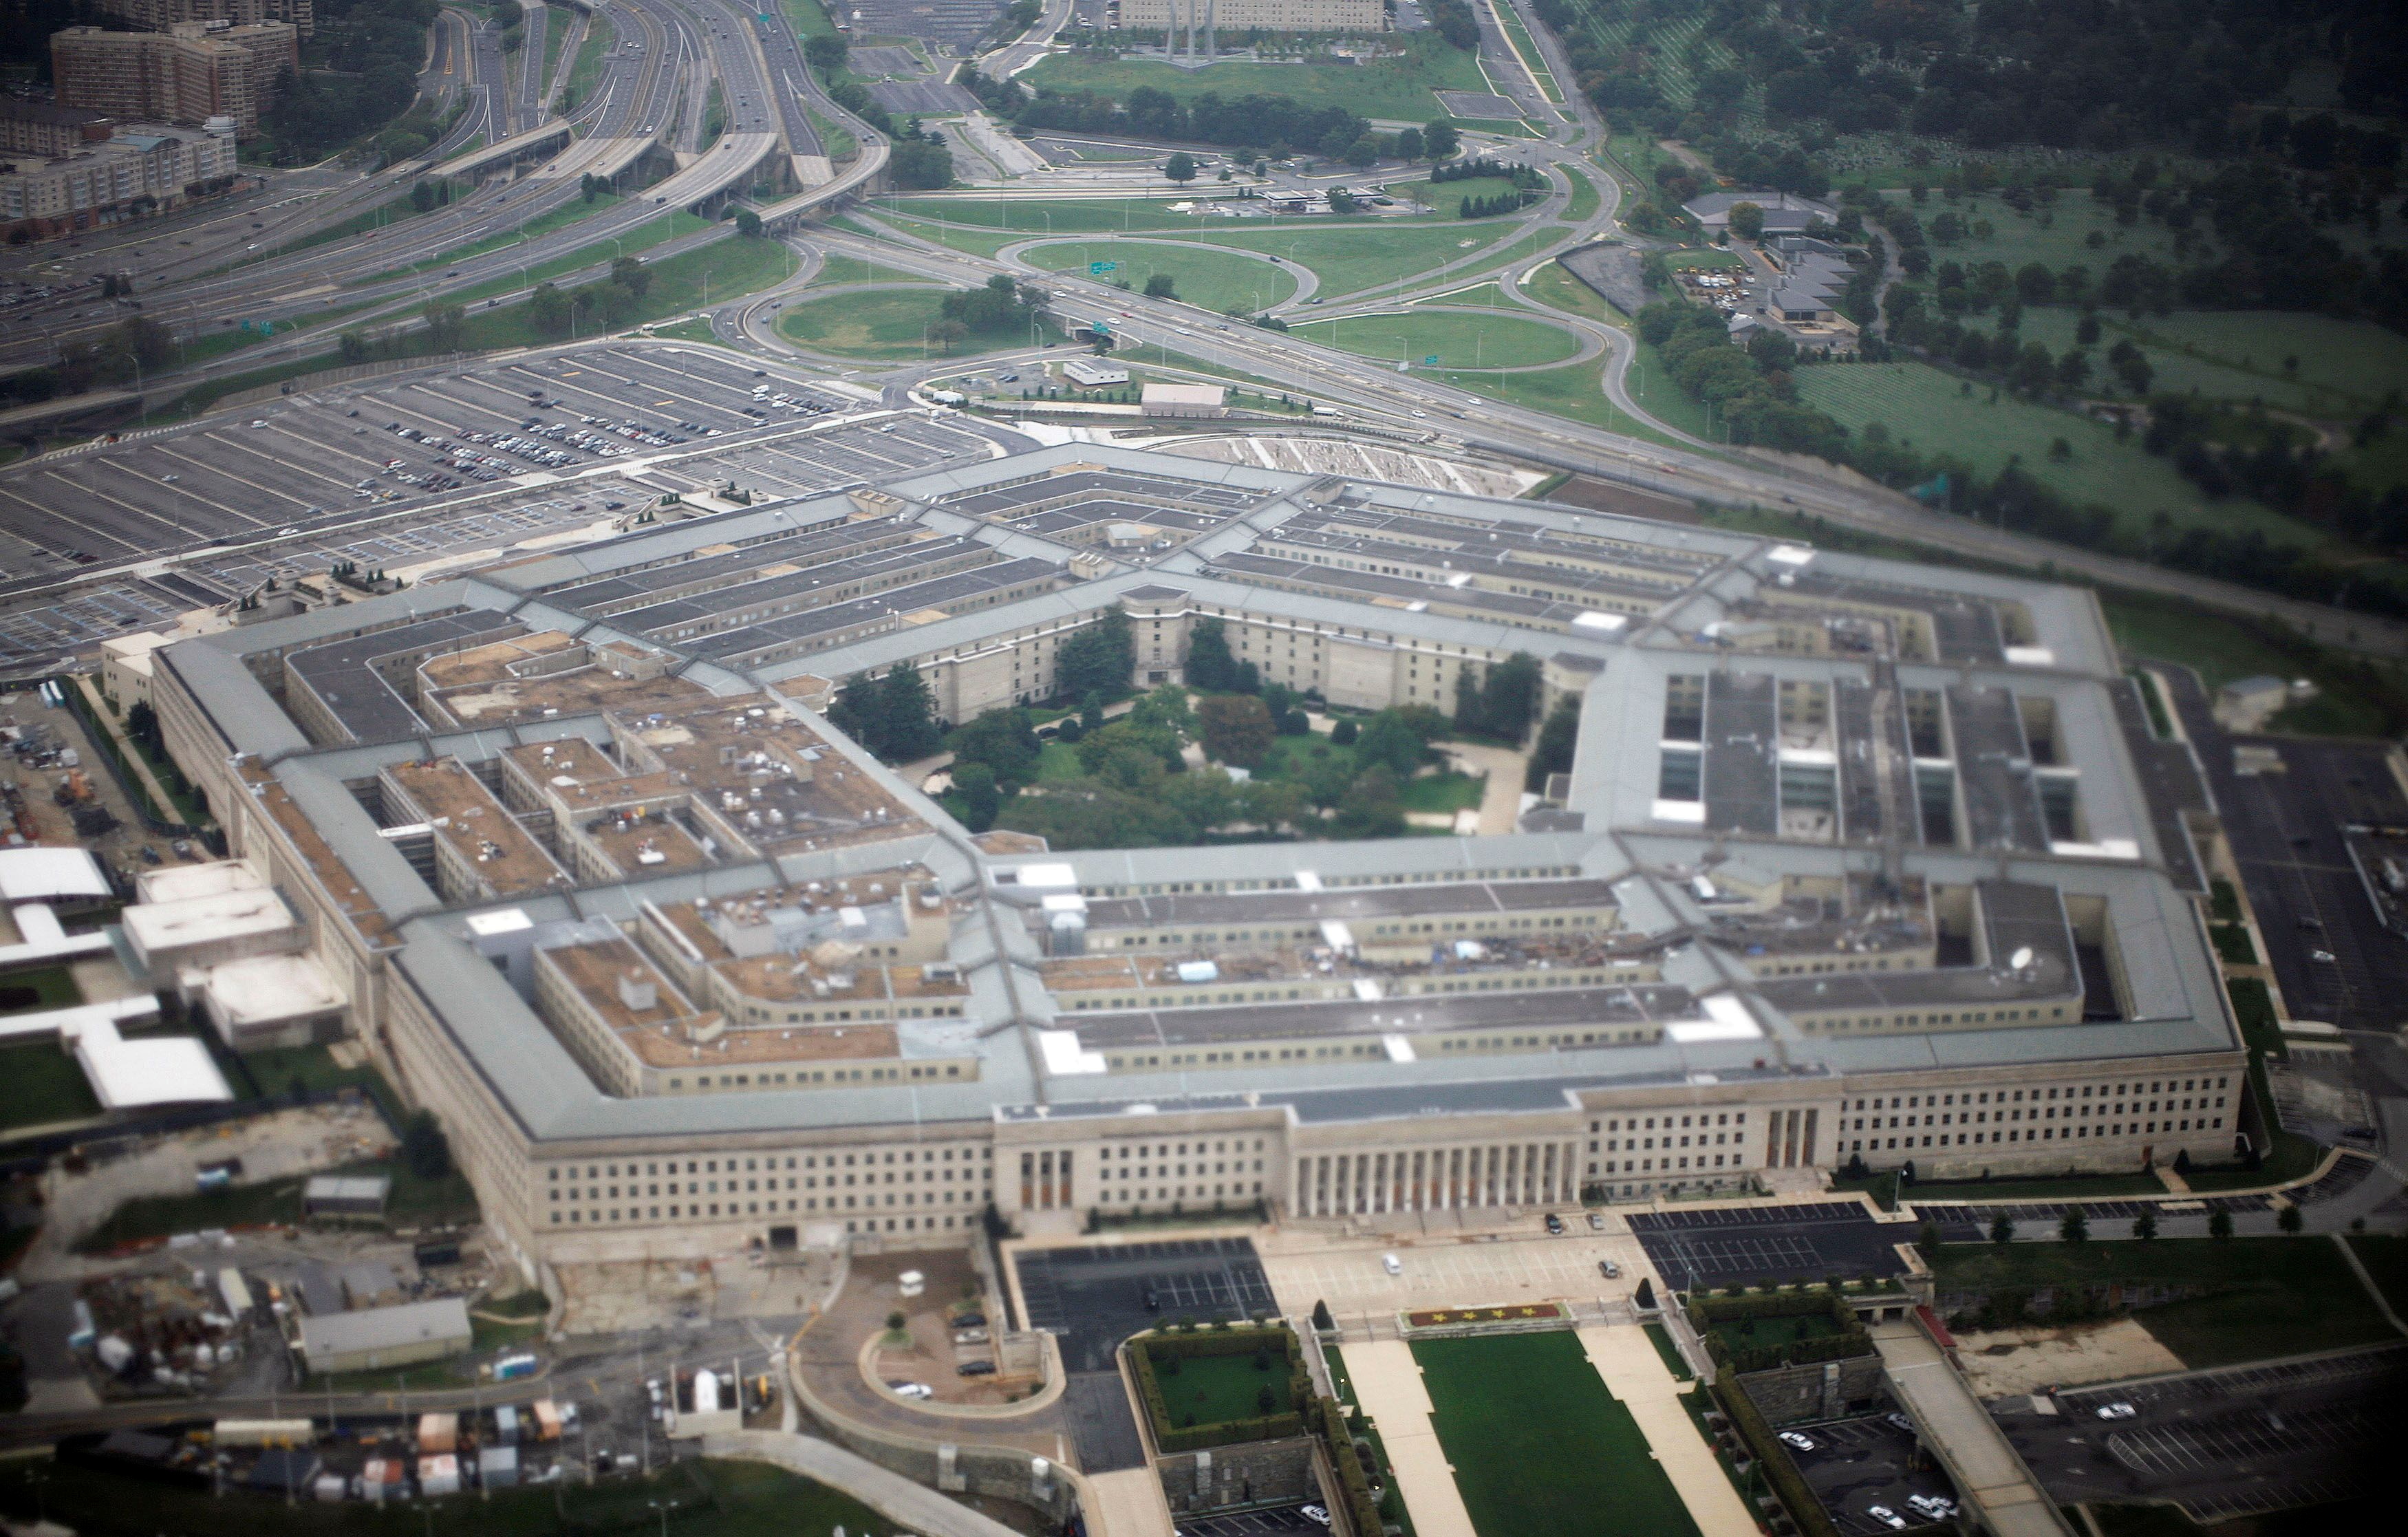 Aerial view of the United States military headquarters, the Pentagon